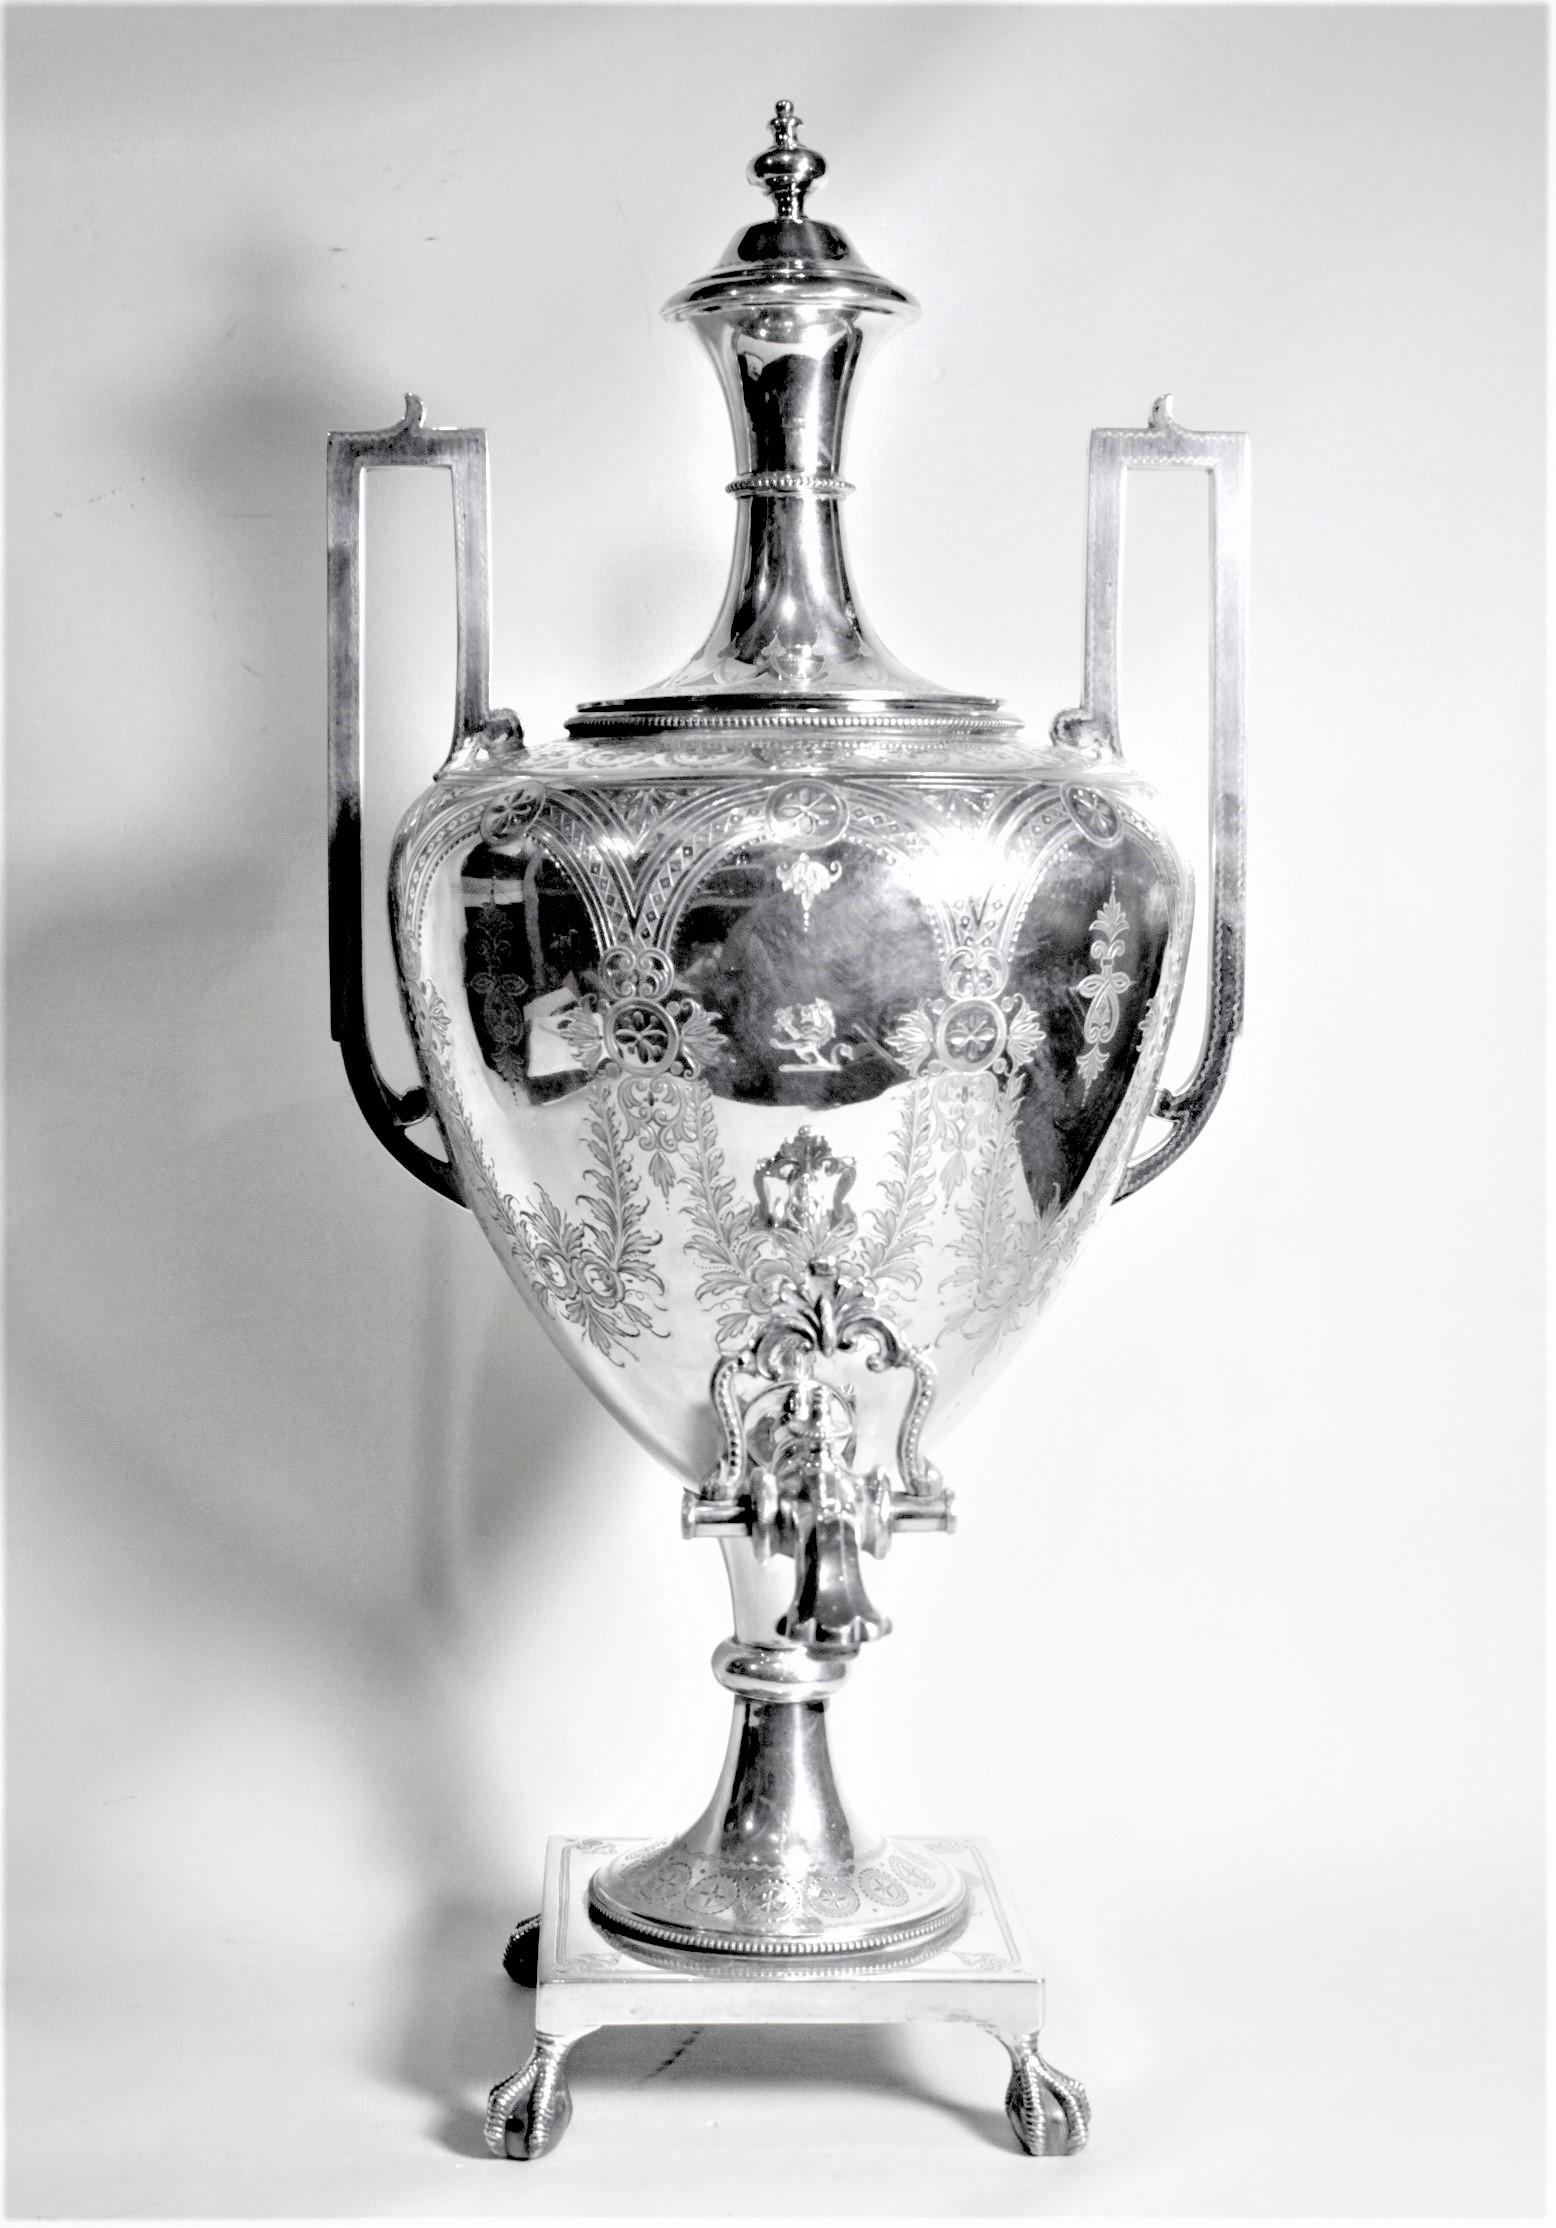 This antique silver plated tea or hot water urn is unsigned, but presumed to have been made in England in circa 1880 in the style of the Aesthetic Movement. The tapered cylindrical shape of the lid and bulbous shaped body are accented by the bold